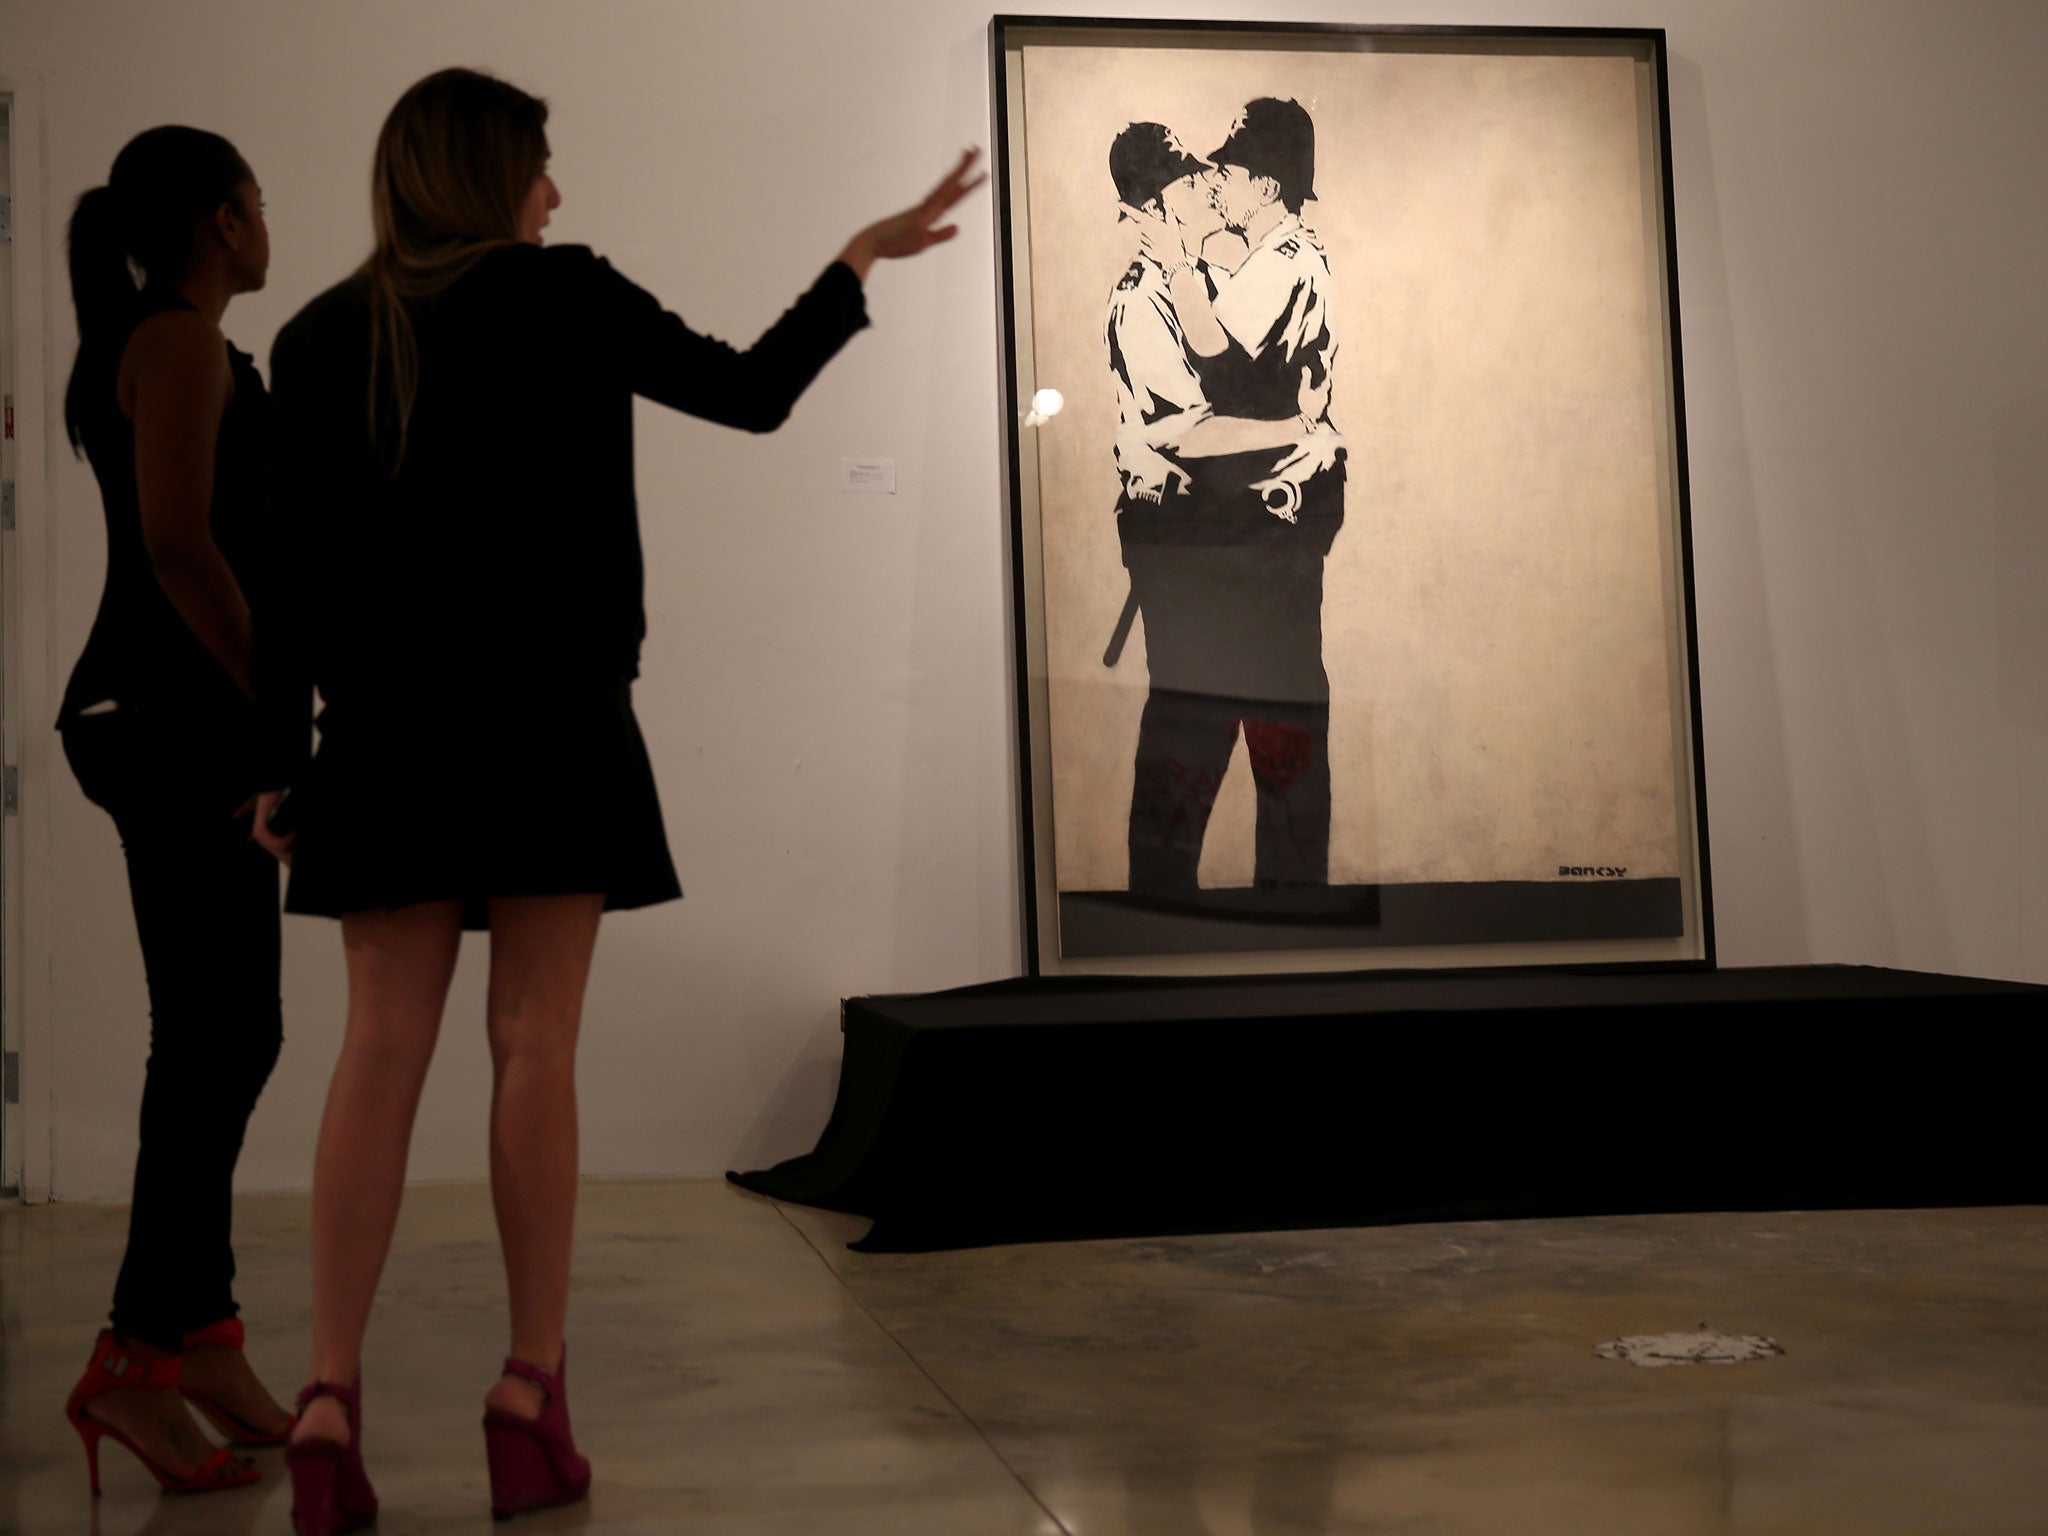 People stand in front of Banksy's 'Kissing Coppers' before it sold for $575,000 at auction in Miami